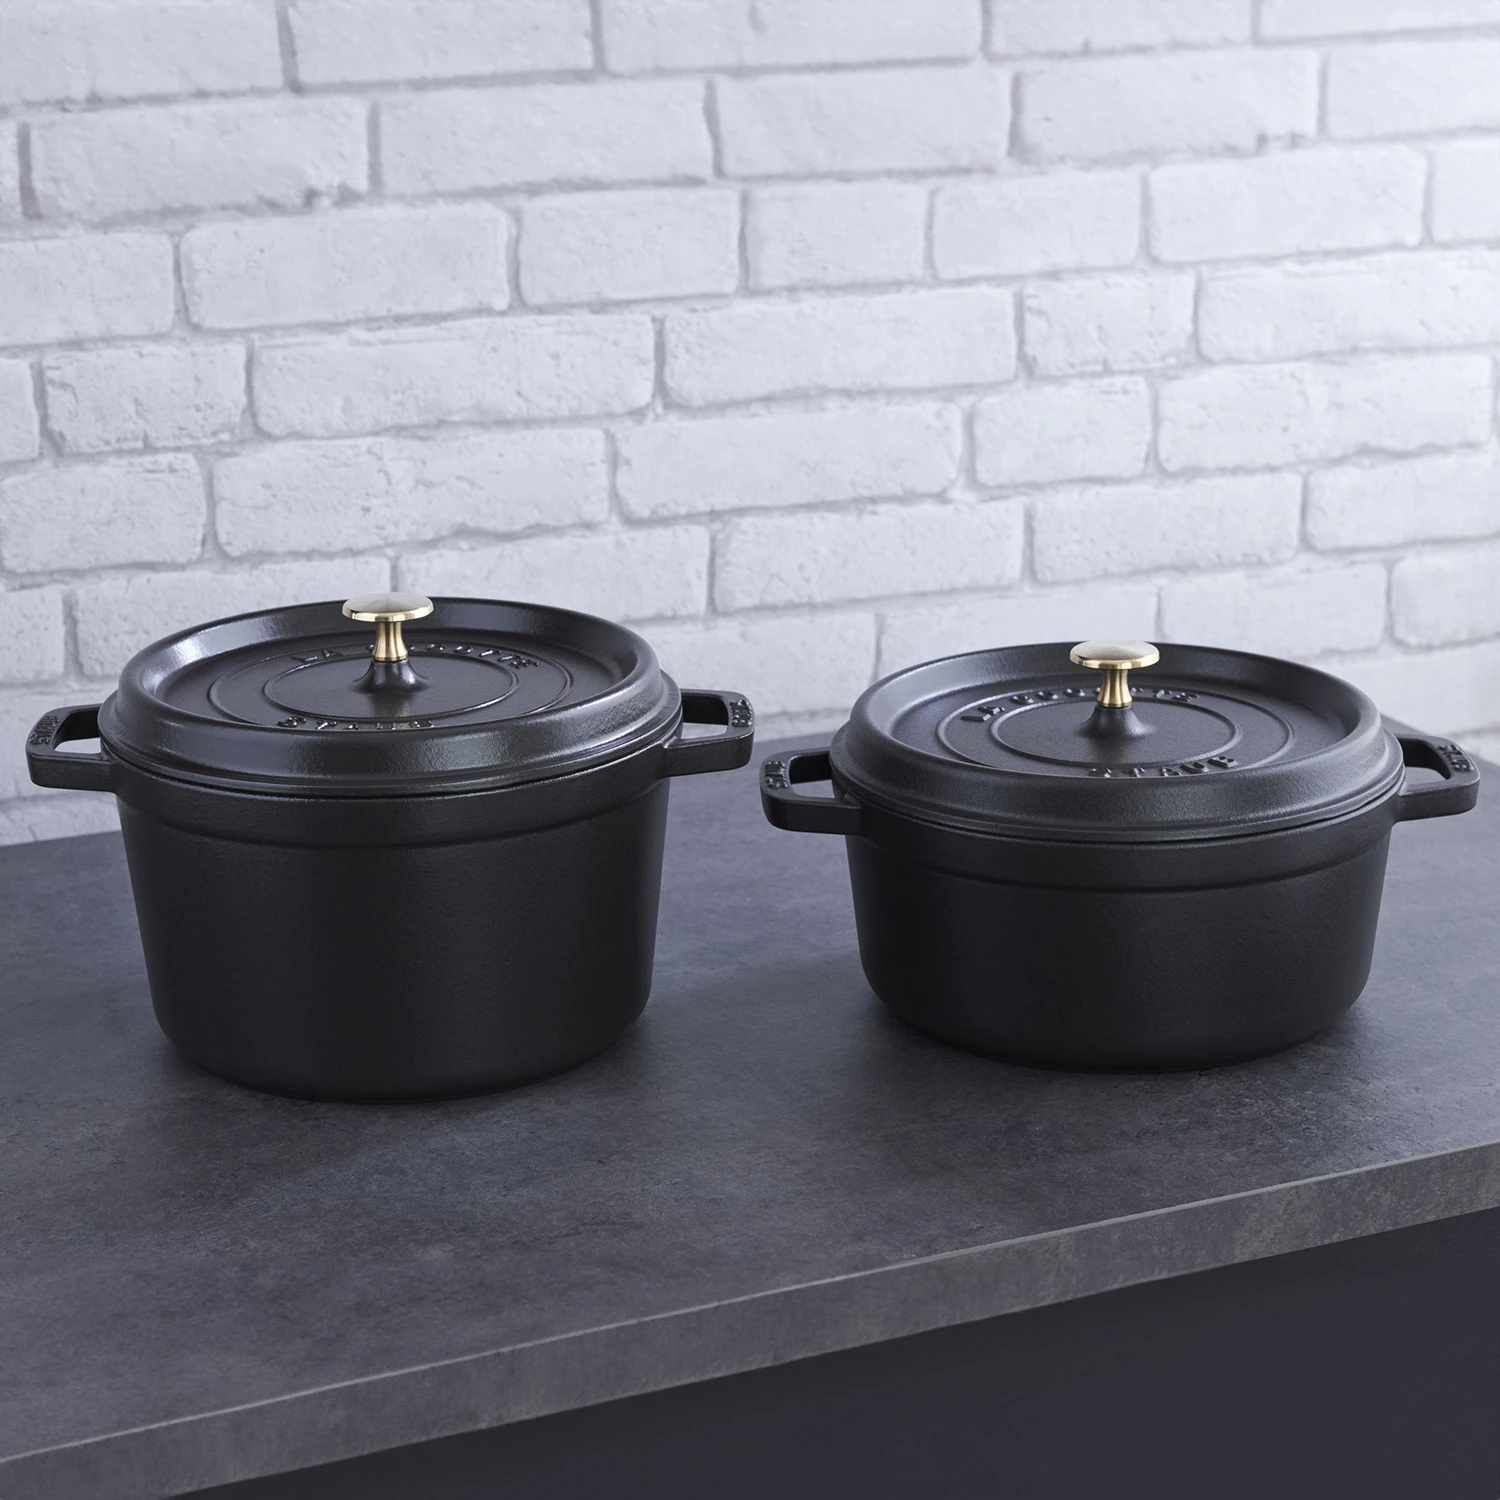 Staub Cast Iron Dutch Oven 5-QT Tall Cocotte, Made In France, Serves 5-6,  Matte Black